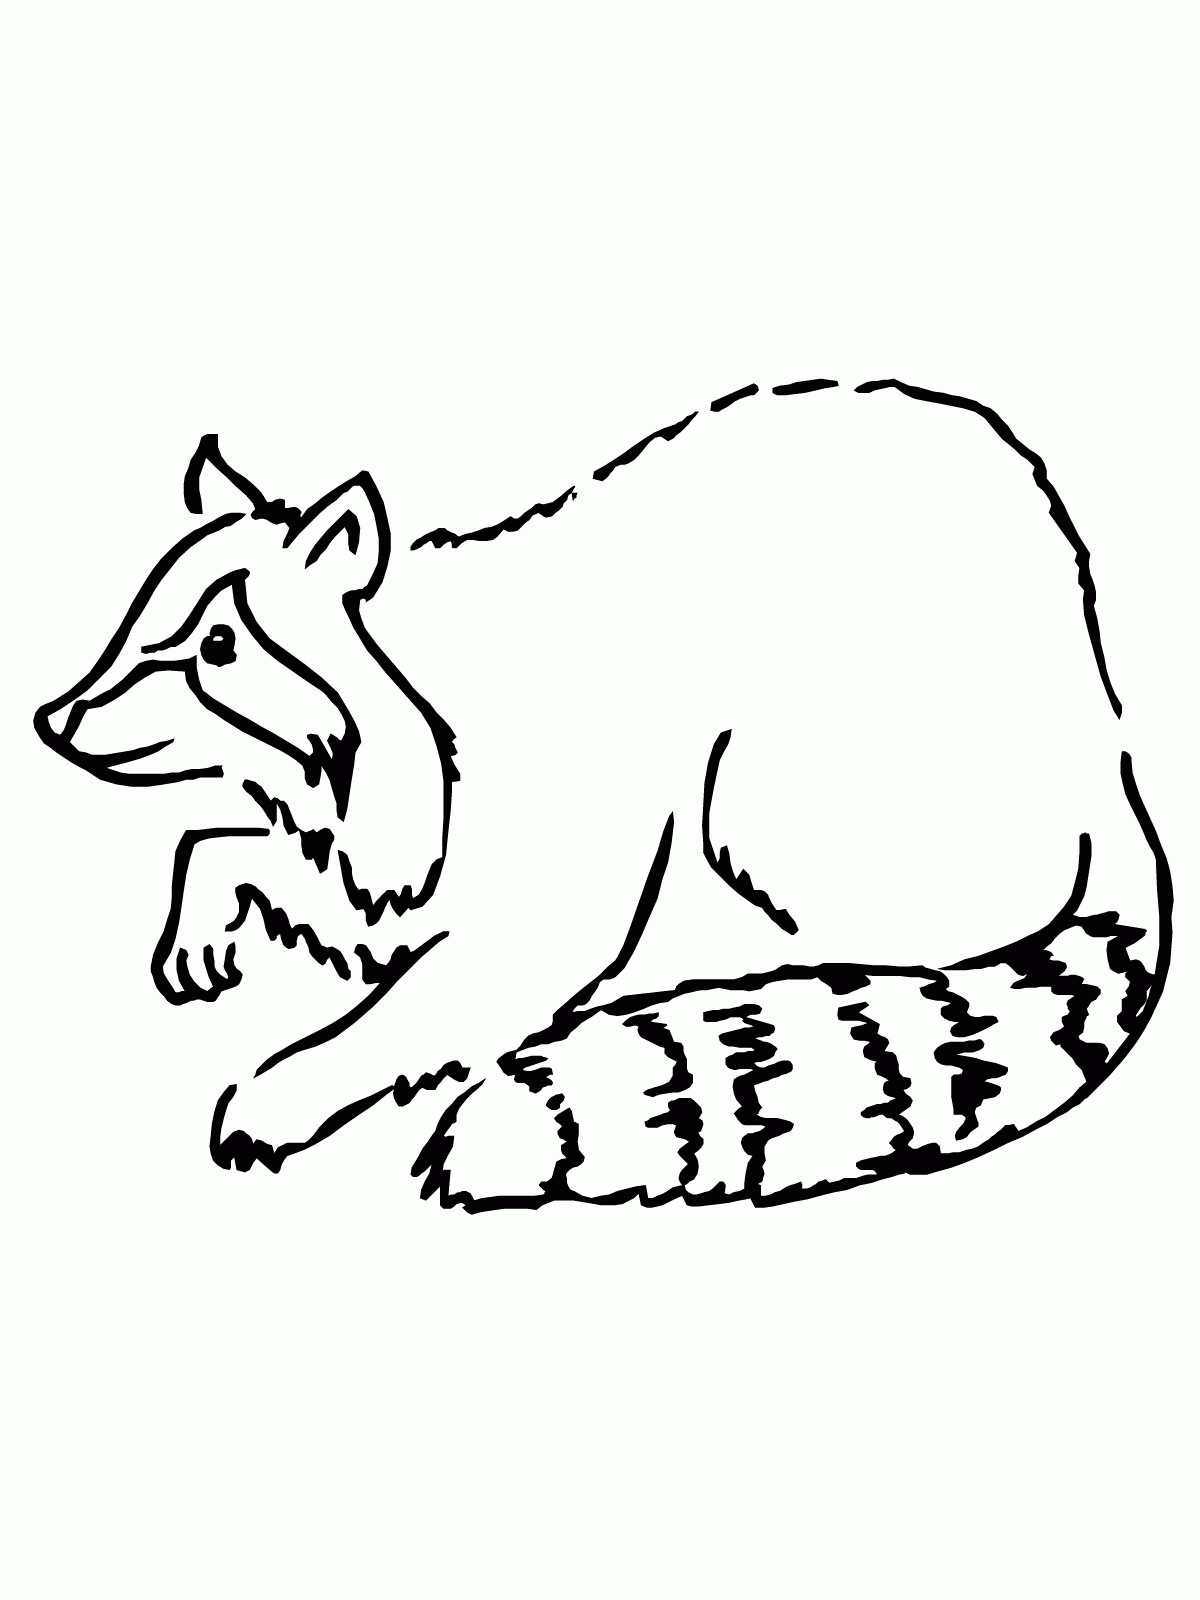 11 Pics of Raccoon Printable Coloring Pages - Raccoon Coloring ...